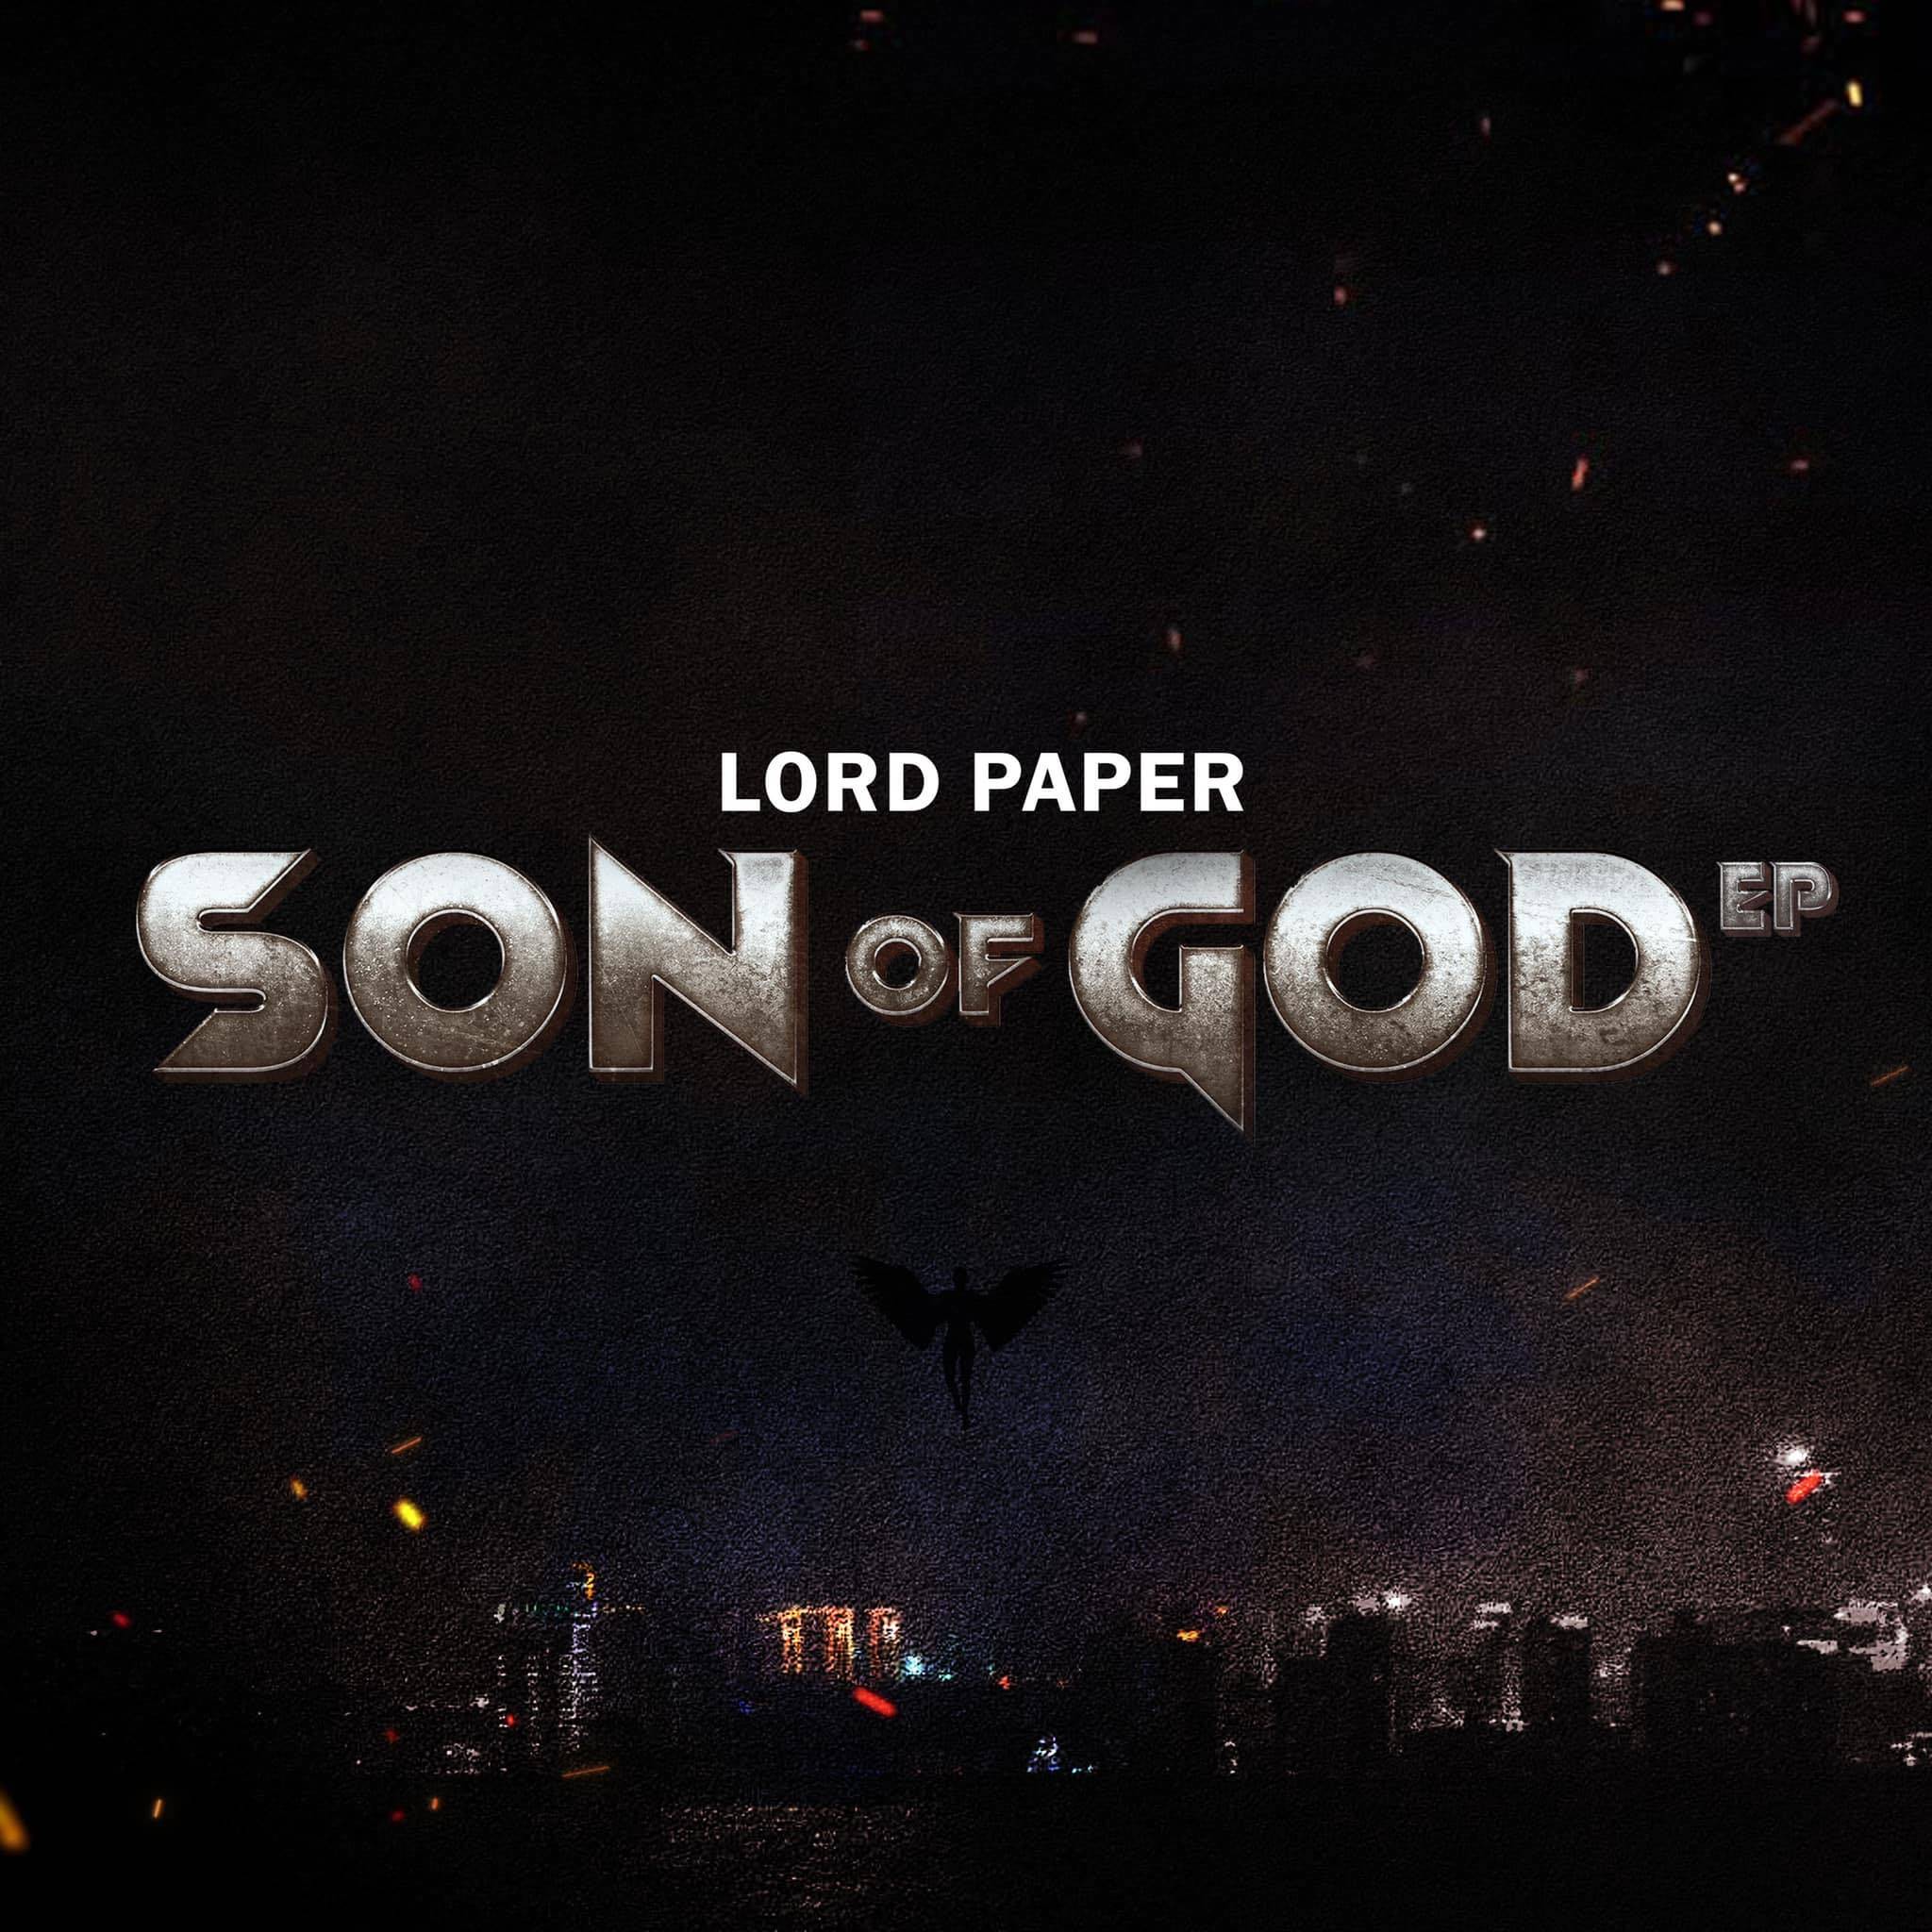 Lord Paper - Son Of God EP